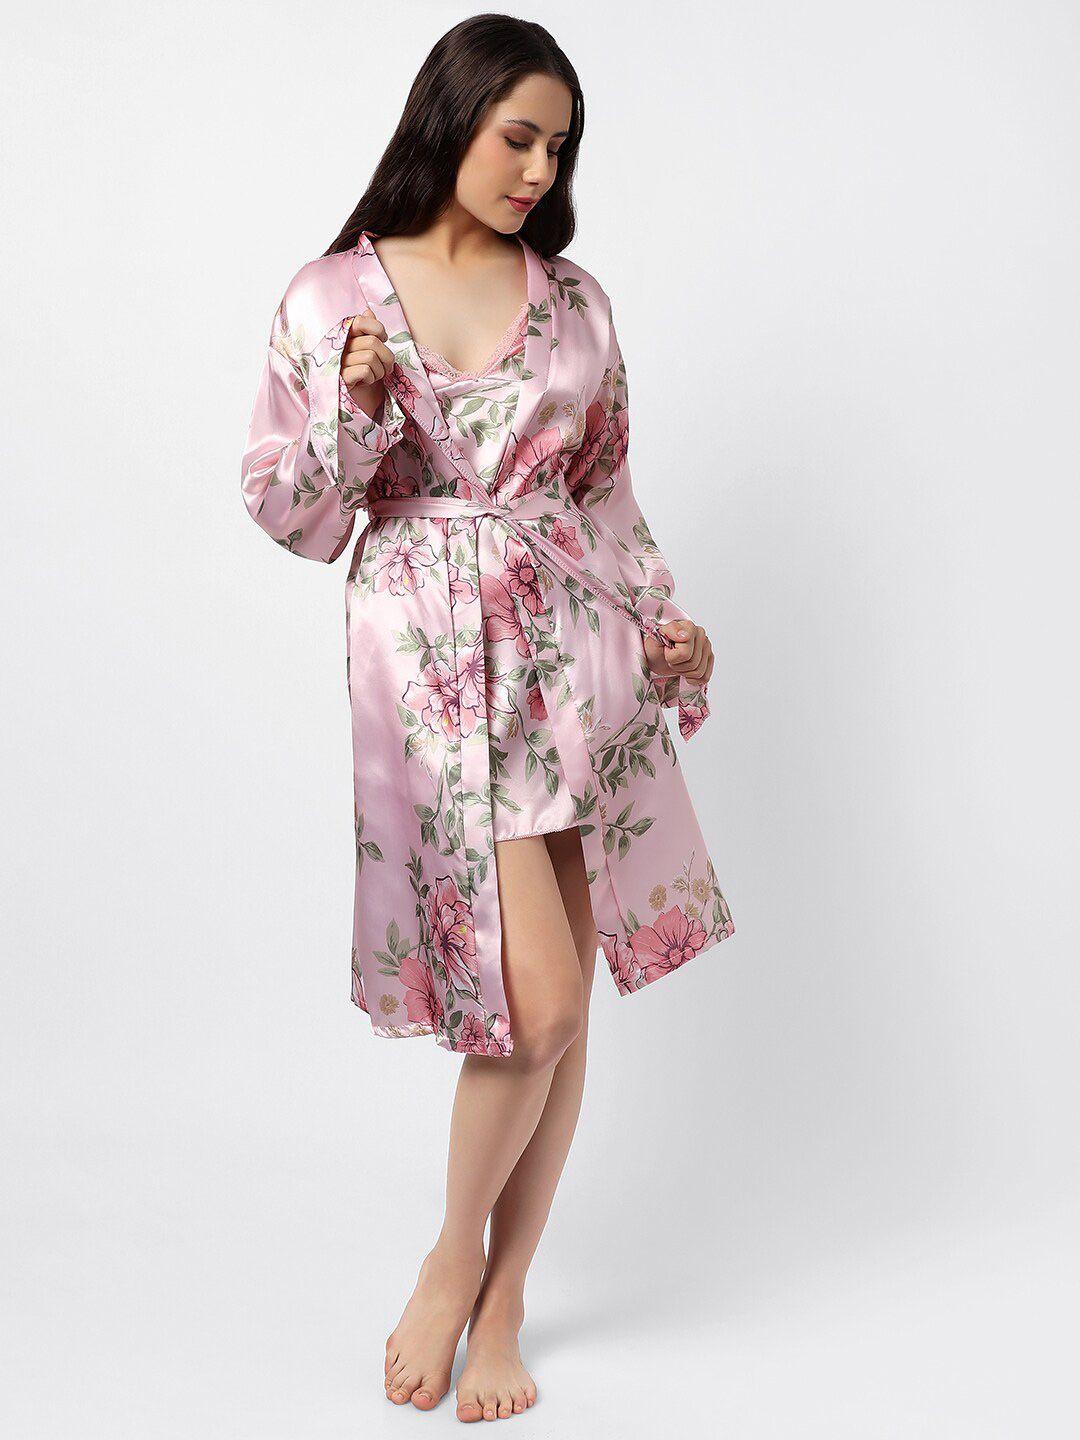 haute sauce by campus sutra 5 pieces of floral printed night suit with robe